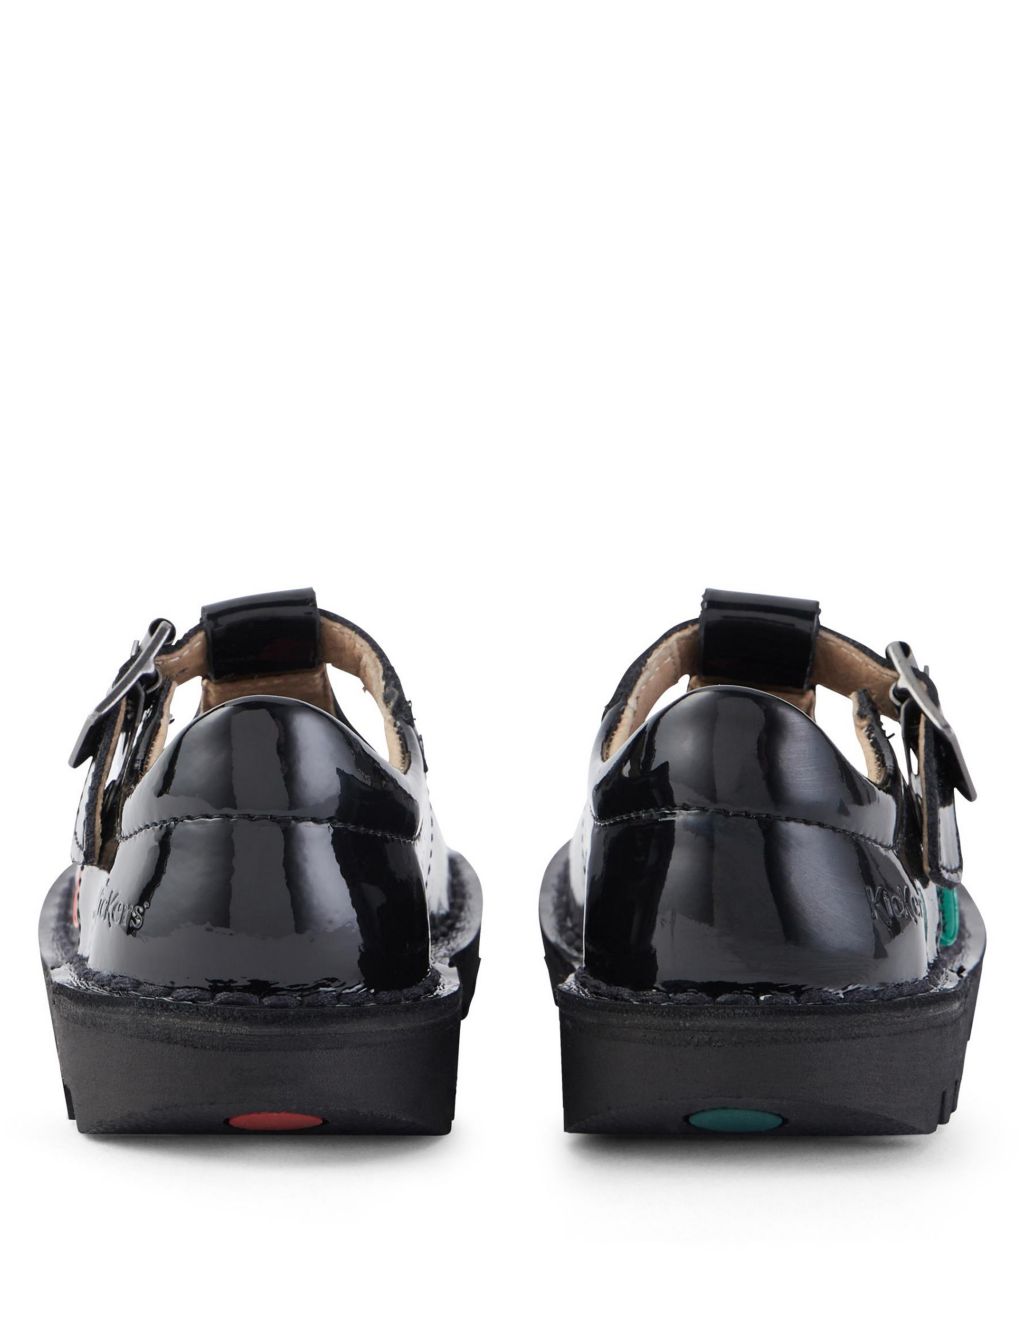 Kids' Patent Leather School Shoes image 3